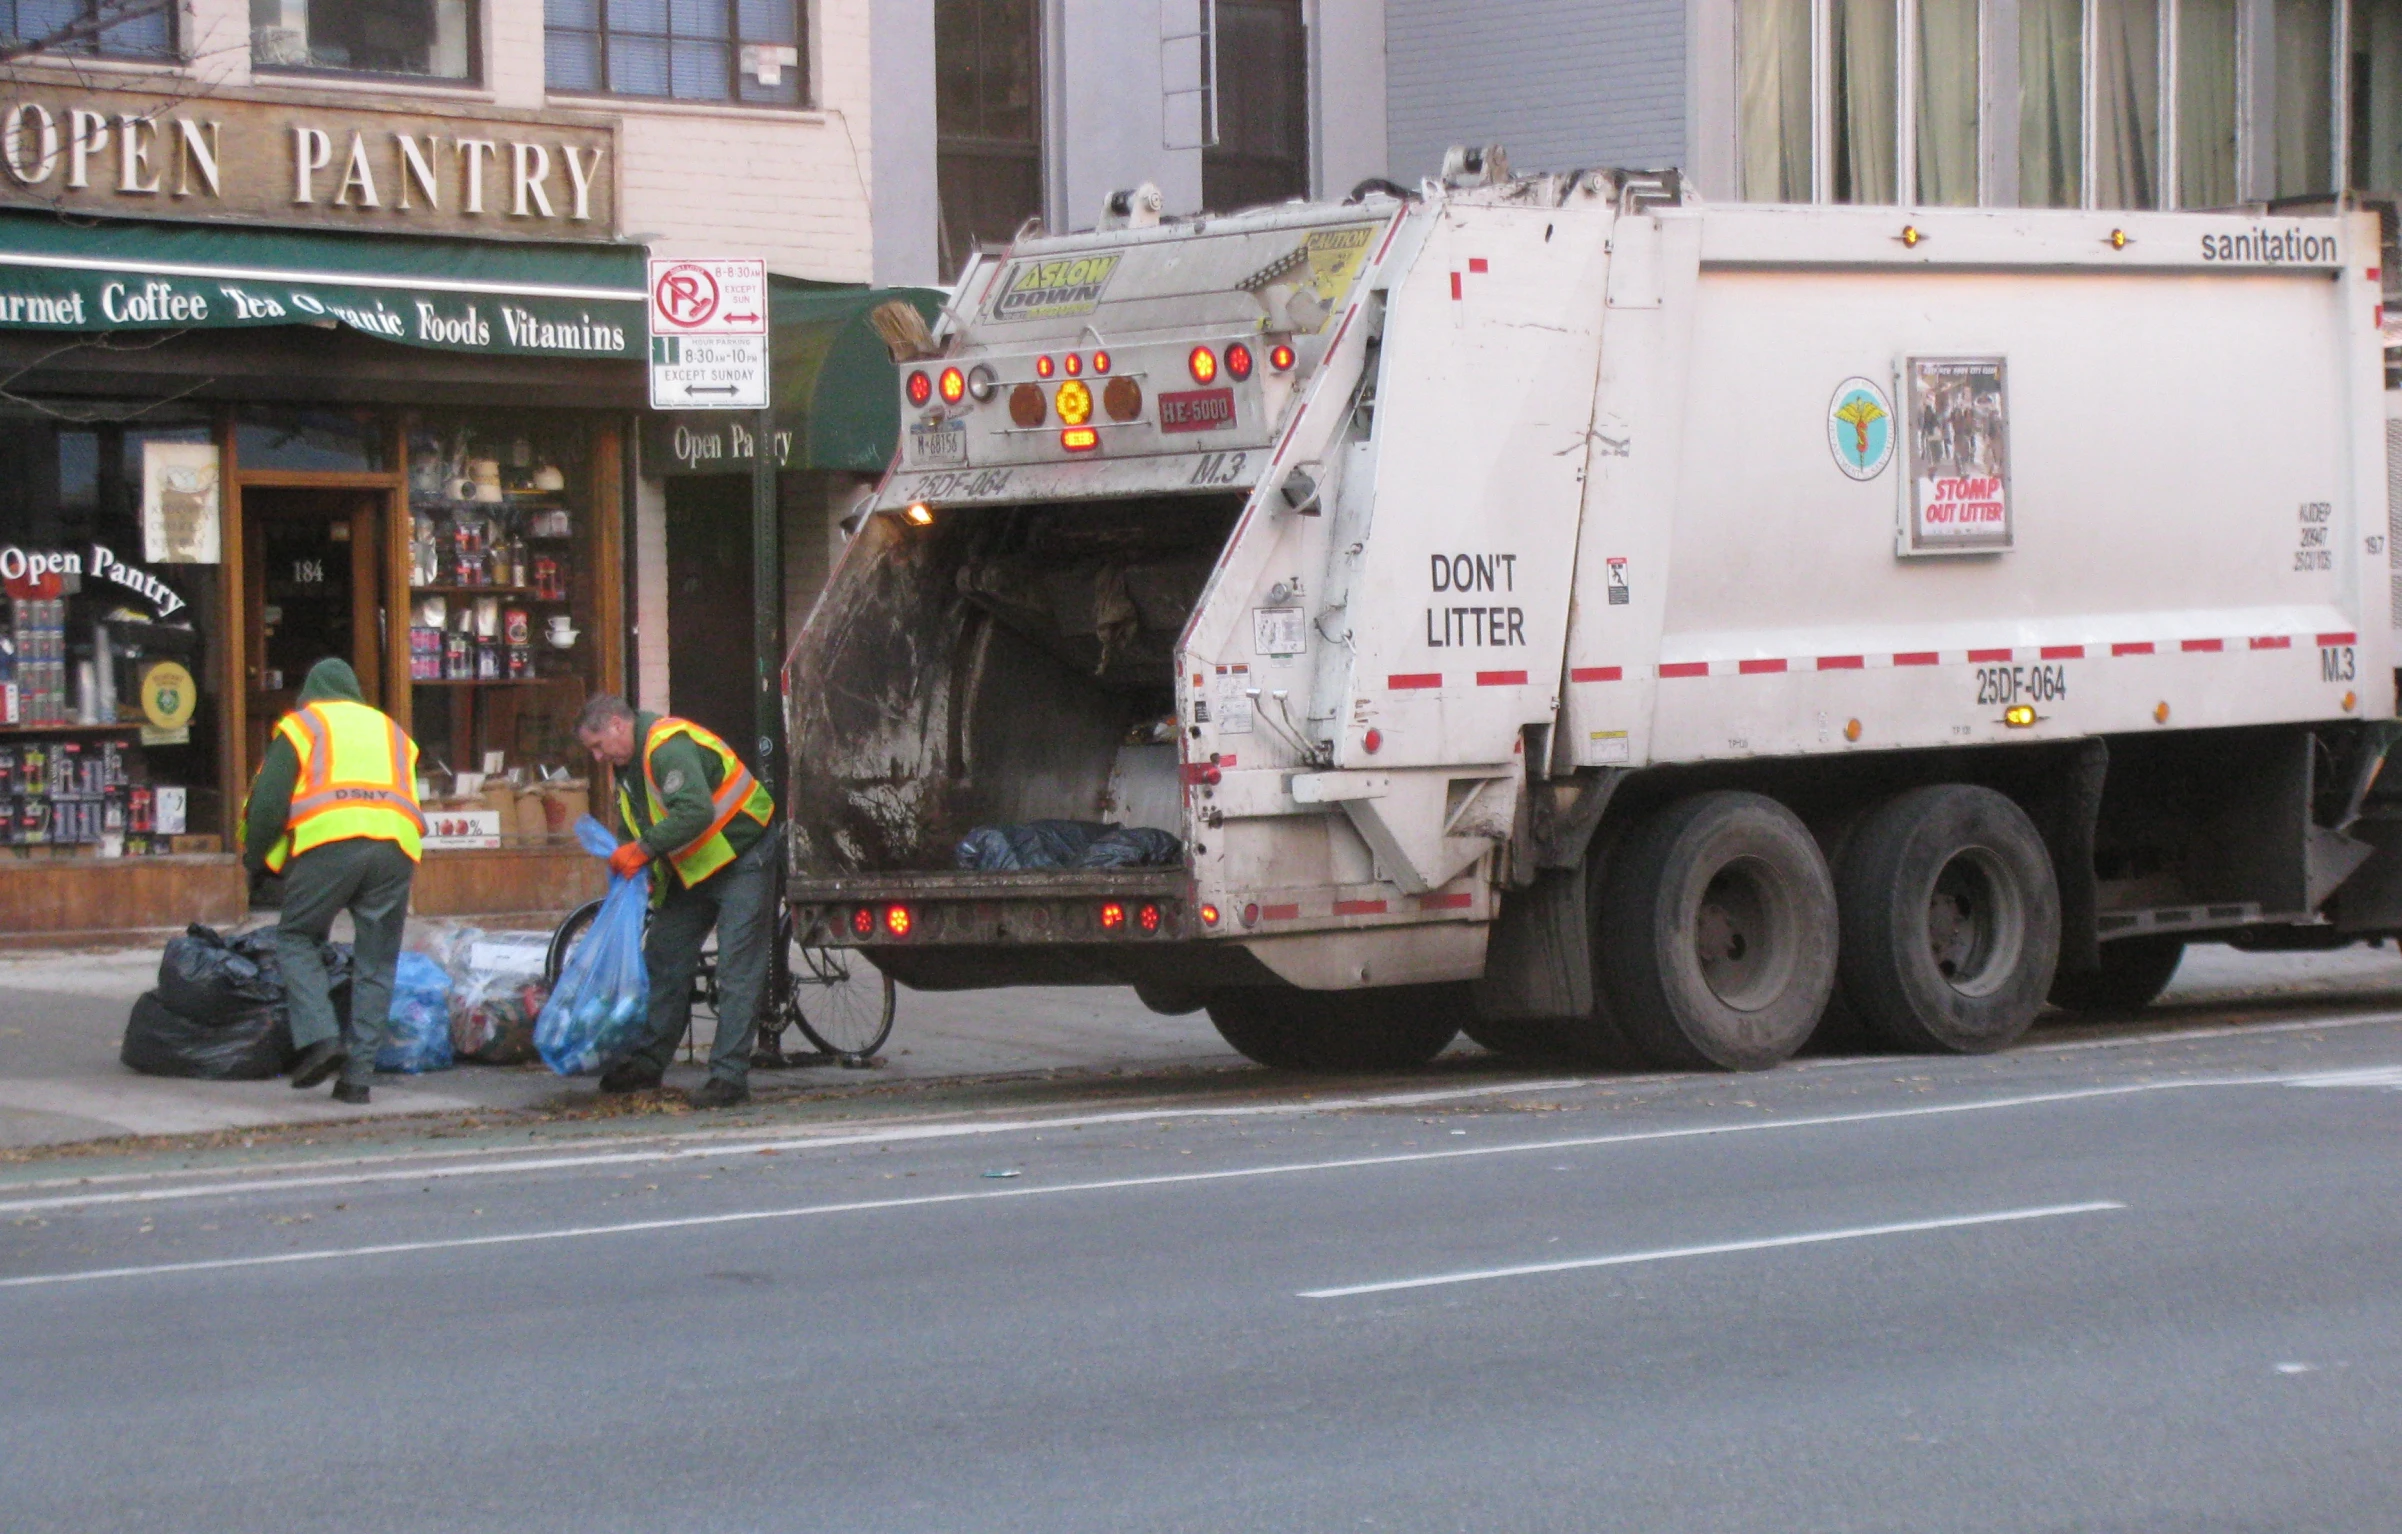 two men stand near a garbage truck while another man pulls it out